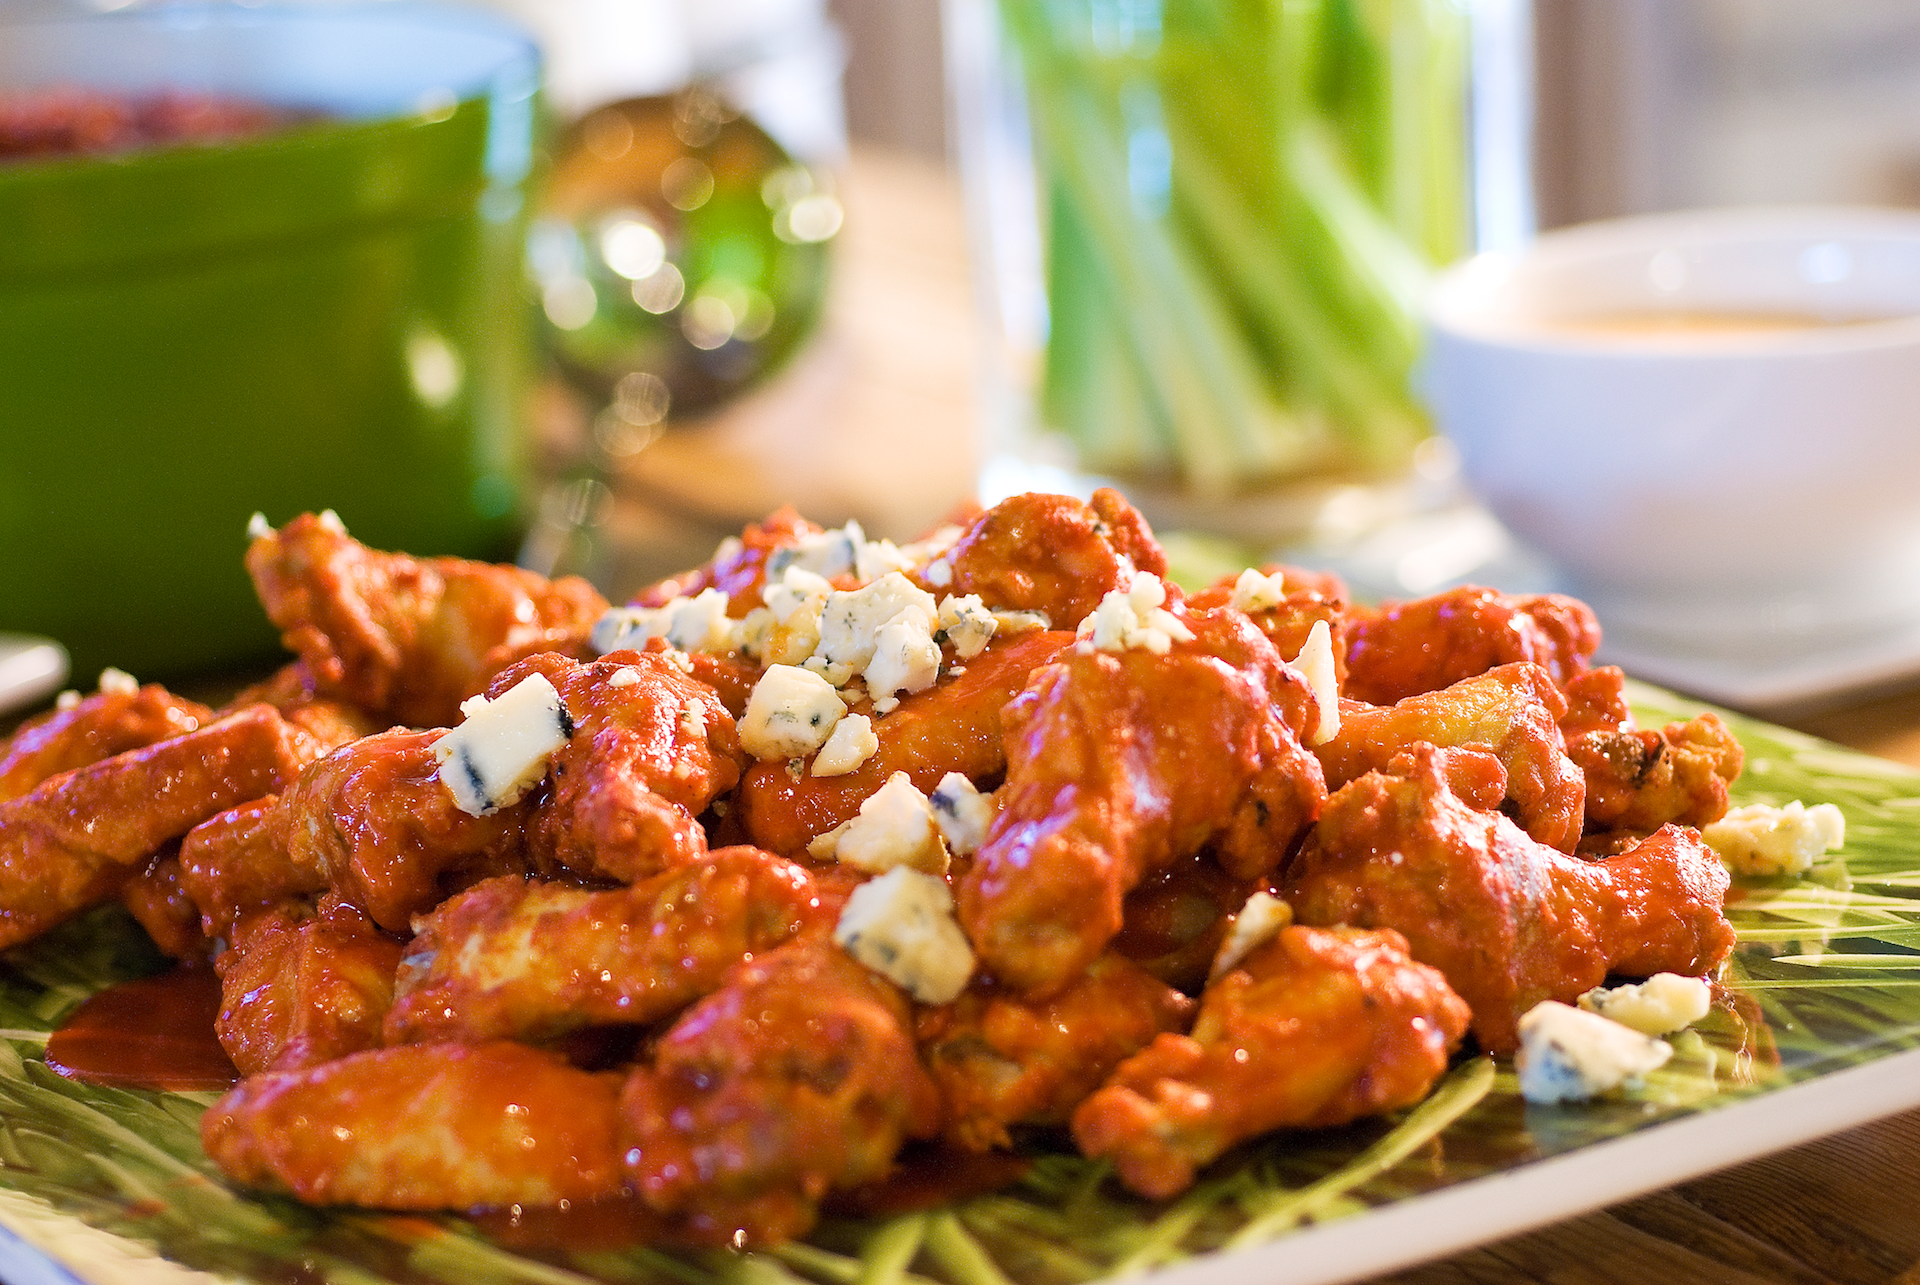 Golden-crispy hot wings smothered in a buttery, hot-and-spicy Buffalo wing sauce and crumbled blue cheese.